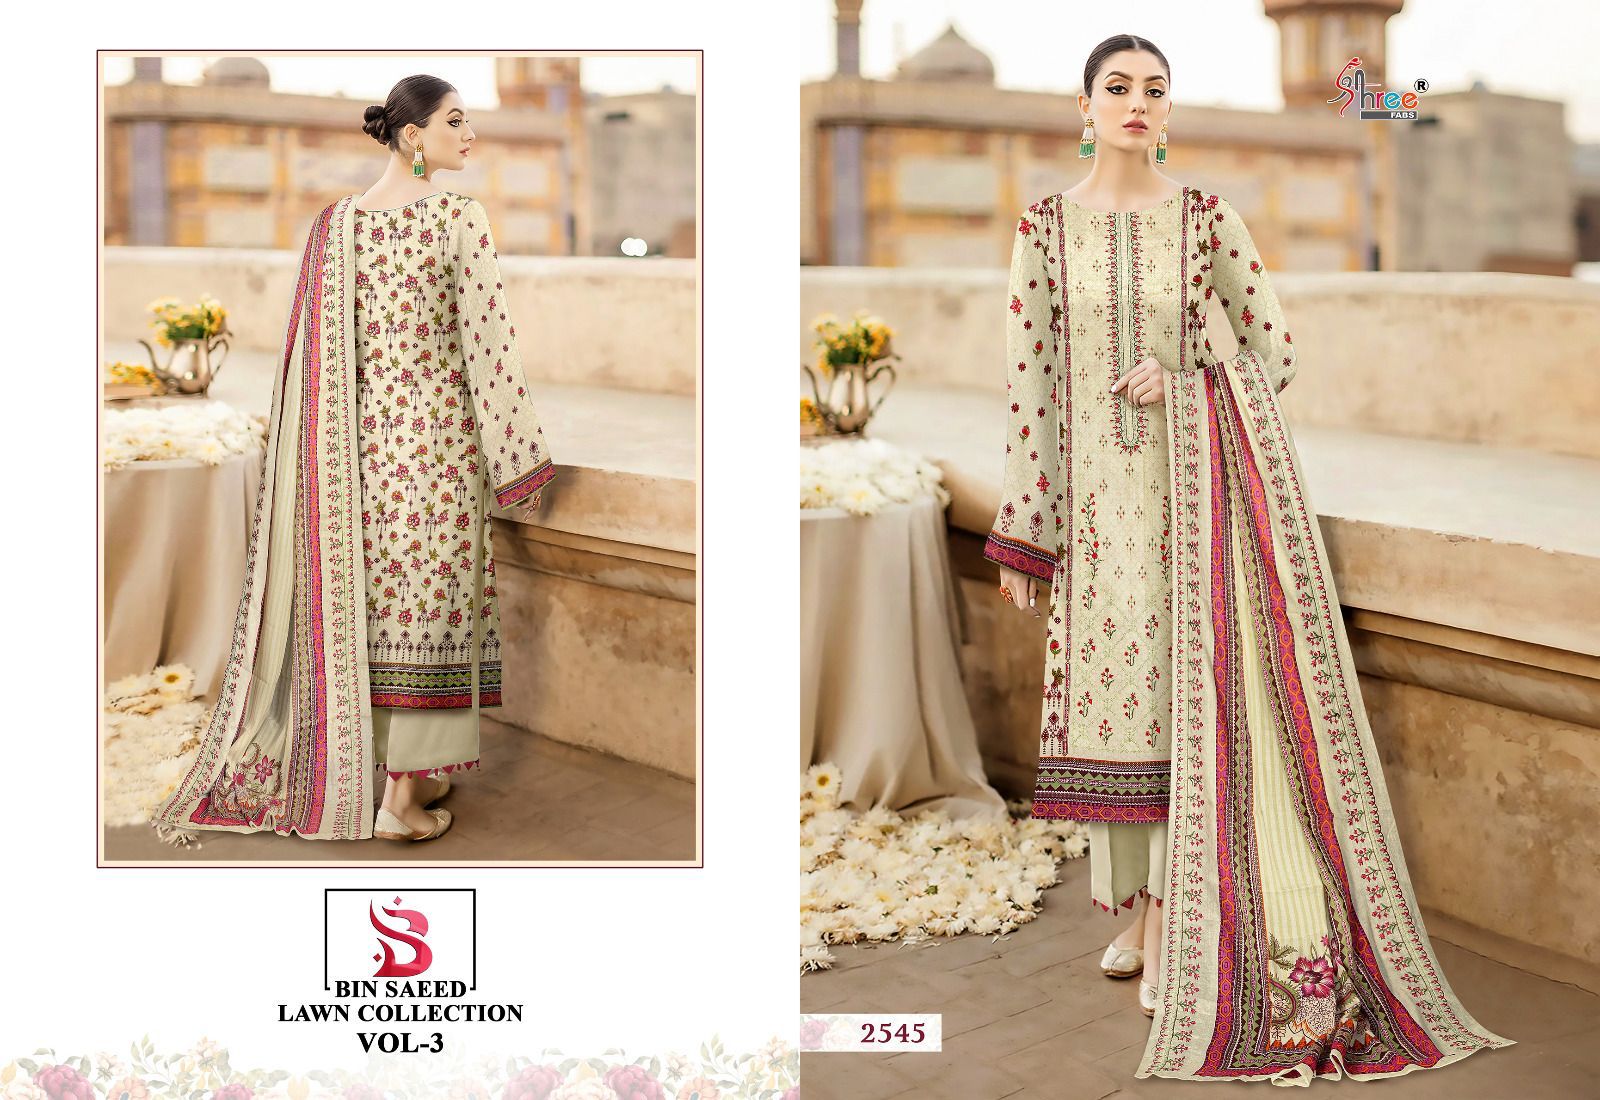 Shree Bin Saeed Lawn Collection Vol 3 collection 4